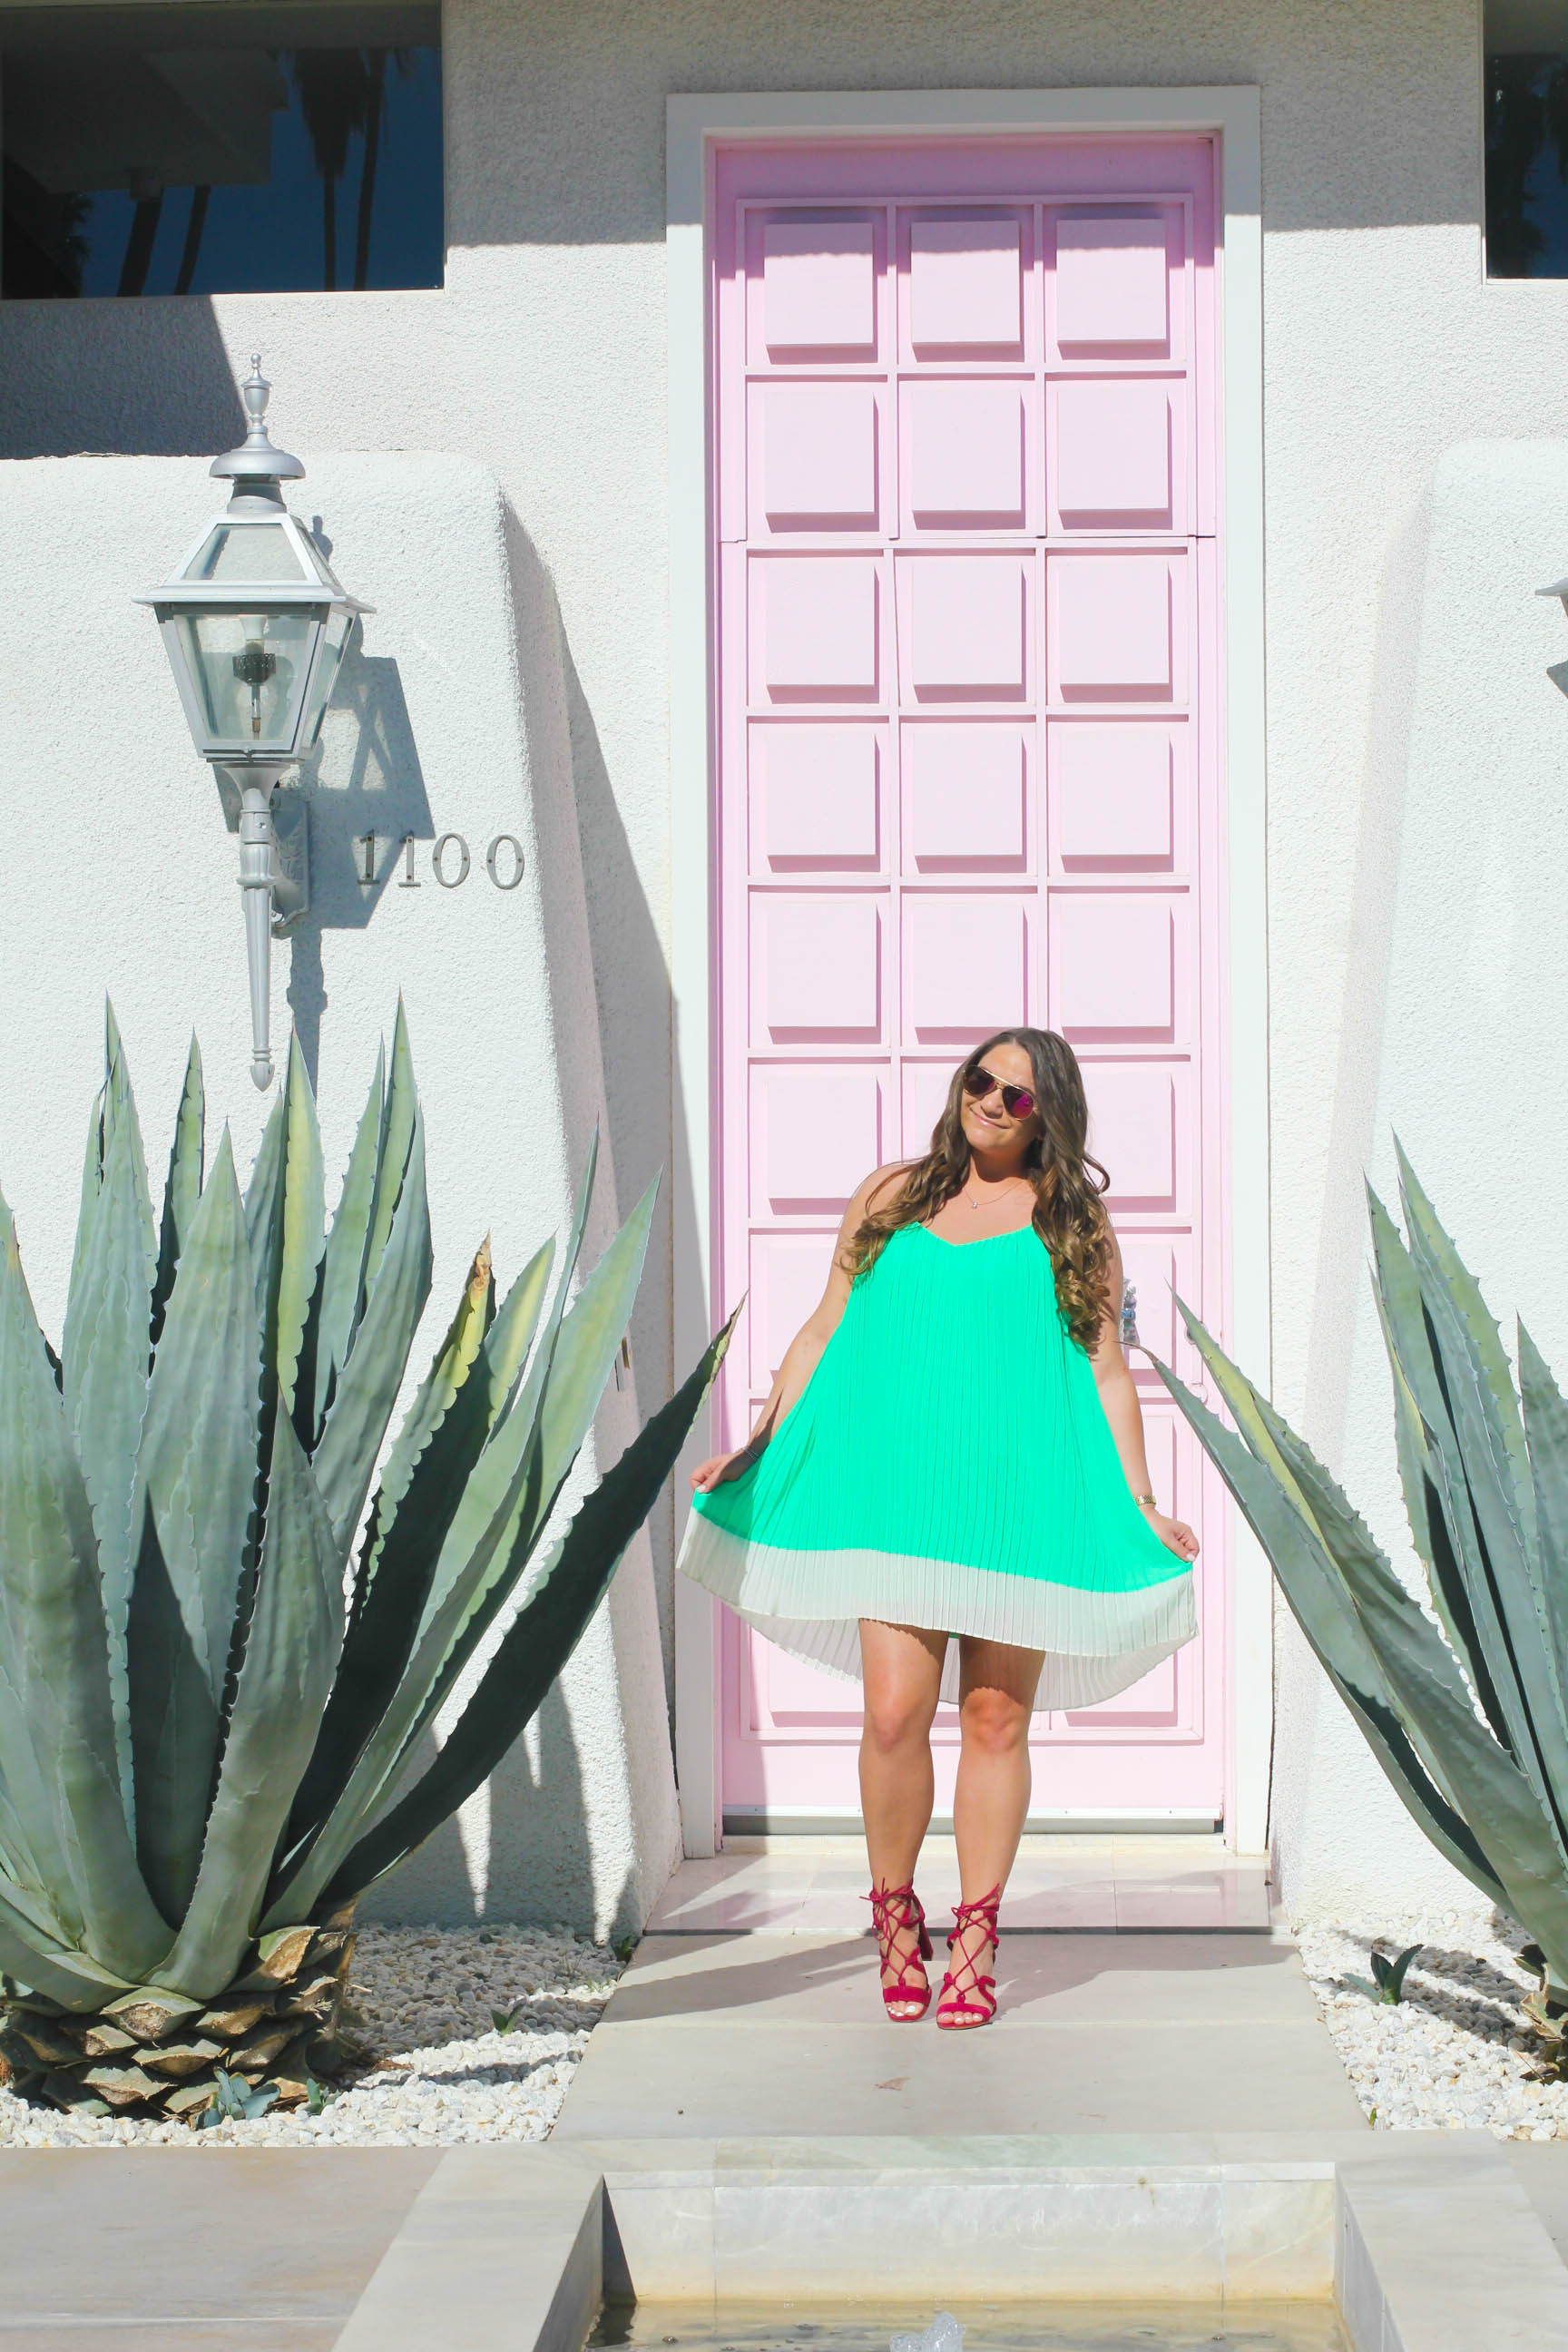 gianvito rossi lace up sandals, gianvito rossi, barneys ny, barneys warehouse sale, barneys sale, pink aviators, green dress, palm springs, palm springs pink door, pink door, instagram doors, wall charades, instagram doors, i have a thing with doors, missyonmadison, melissa tierney, missyonmadison instagram, la blogger, blogger style, turning 25, 25 things, happy birthday, birthday, birthday style, fashion blogger, mint green dress, green pleated dress, fuschia heels,